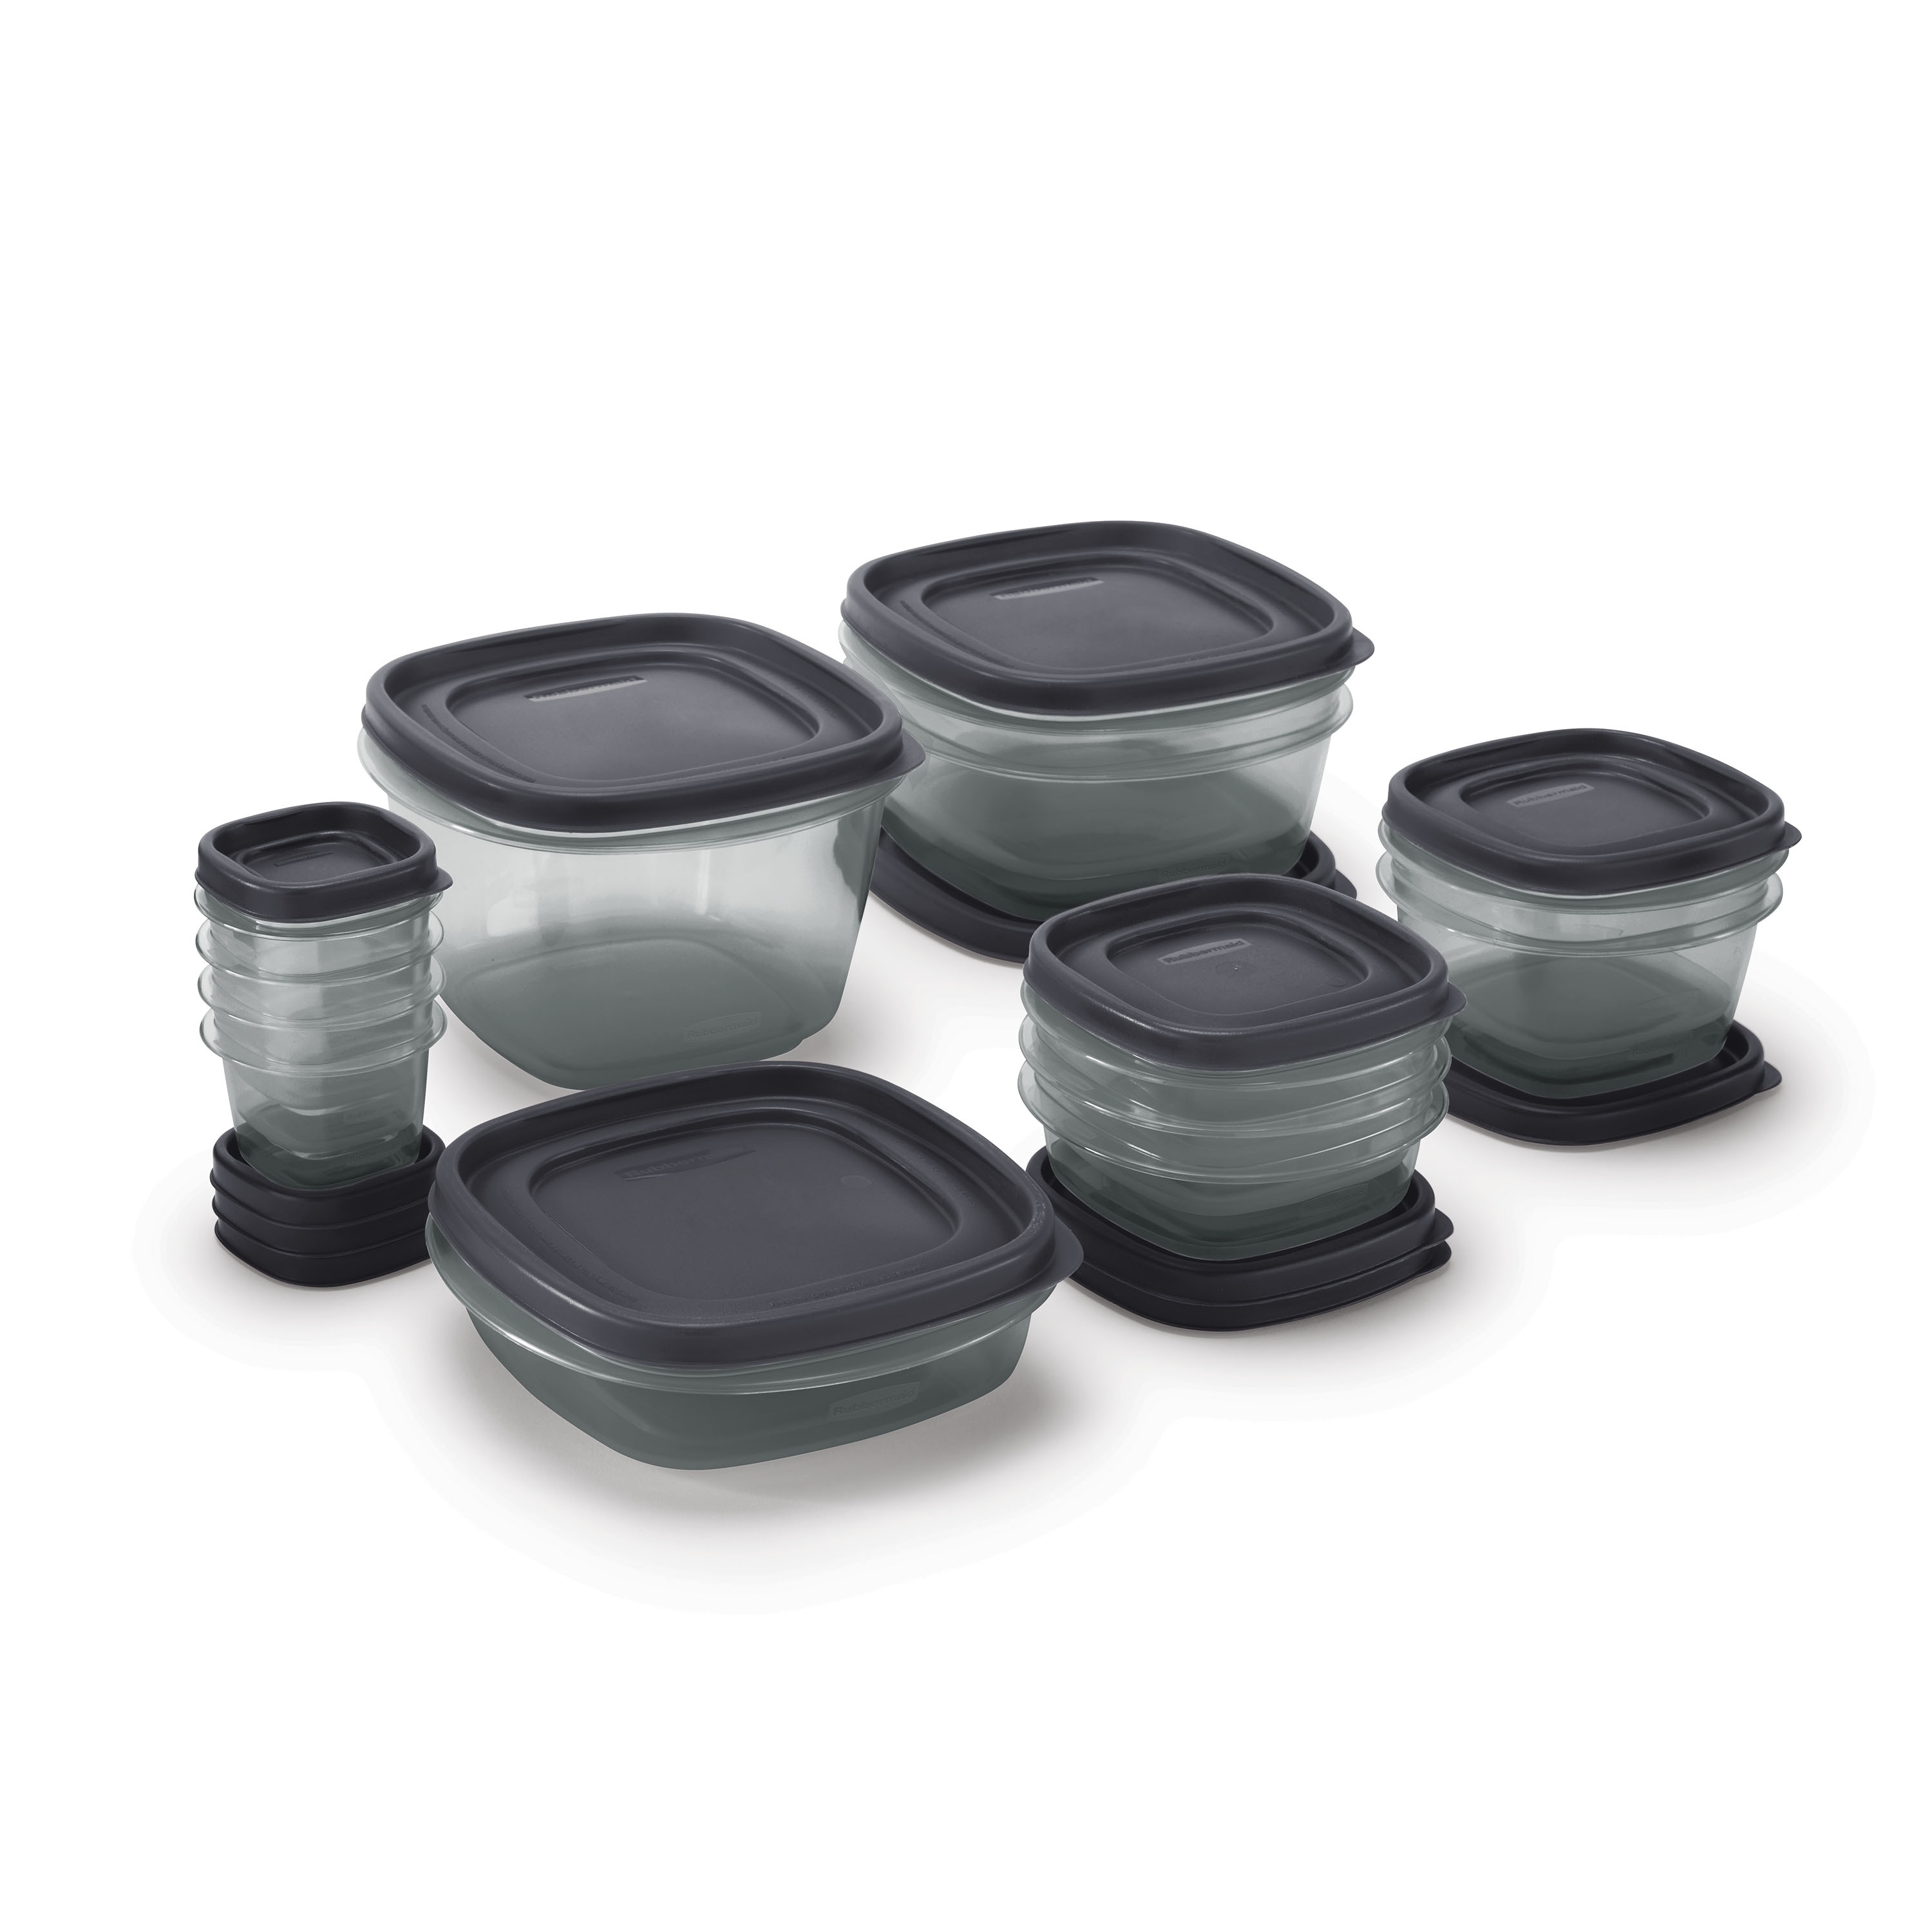 https://ak1.ostkcdn.com/images/products/is/images/direct/87da8be0db57681405301ede3efed49ccb584720/Rubbermaid%C2%AE-Easy-Find-Lids%E2%84%A2-Food-Storage-Containers-with-SilverShield-Antimicrobial-Product-Protection%2C-24-Piece-Set.jpg